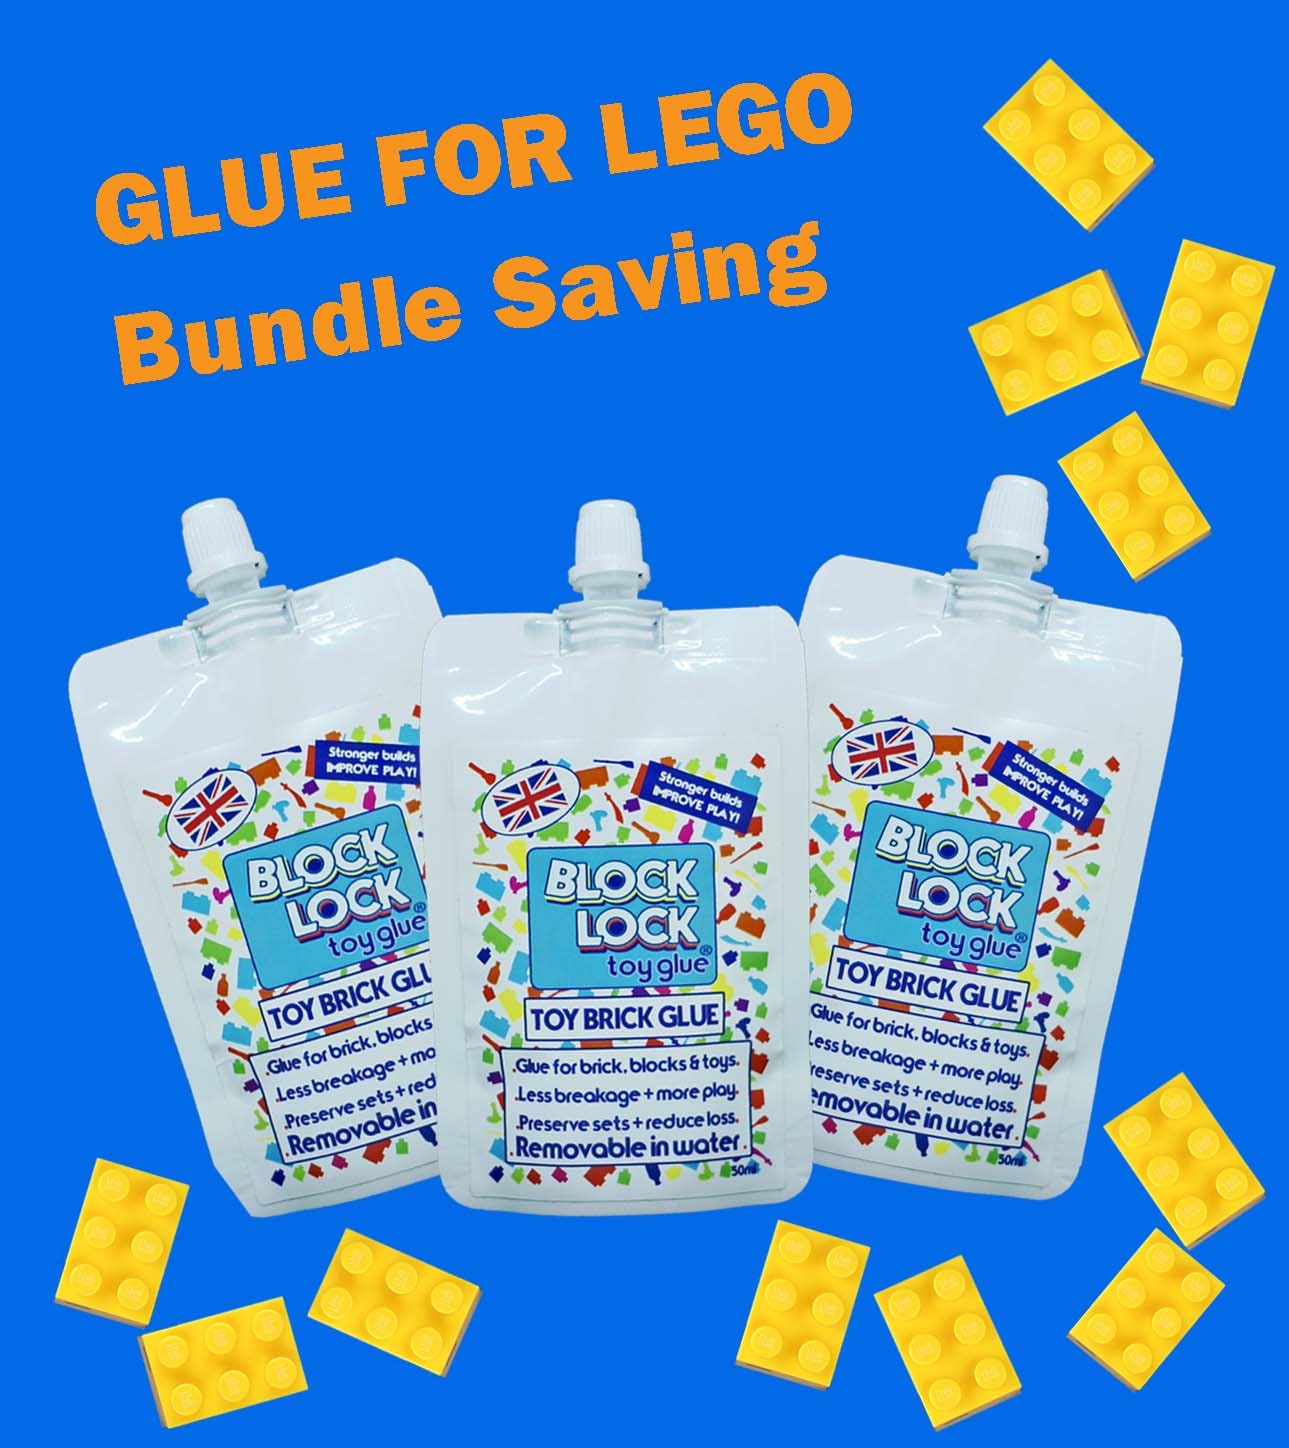 LEGO what's going on with your glue? I bought 4 of the same set today and  3/4 the glue adhesive failed in the same spot : r/lego